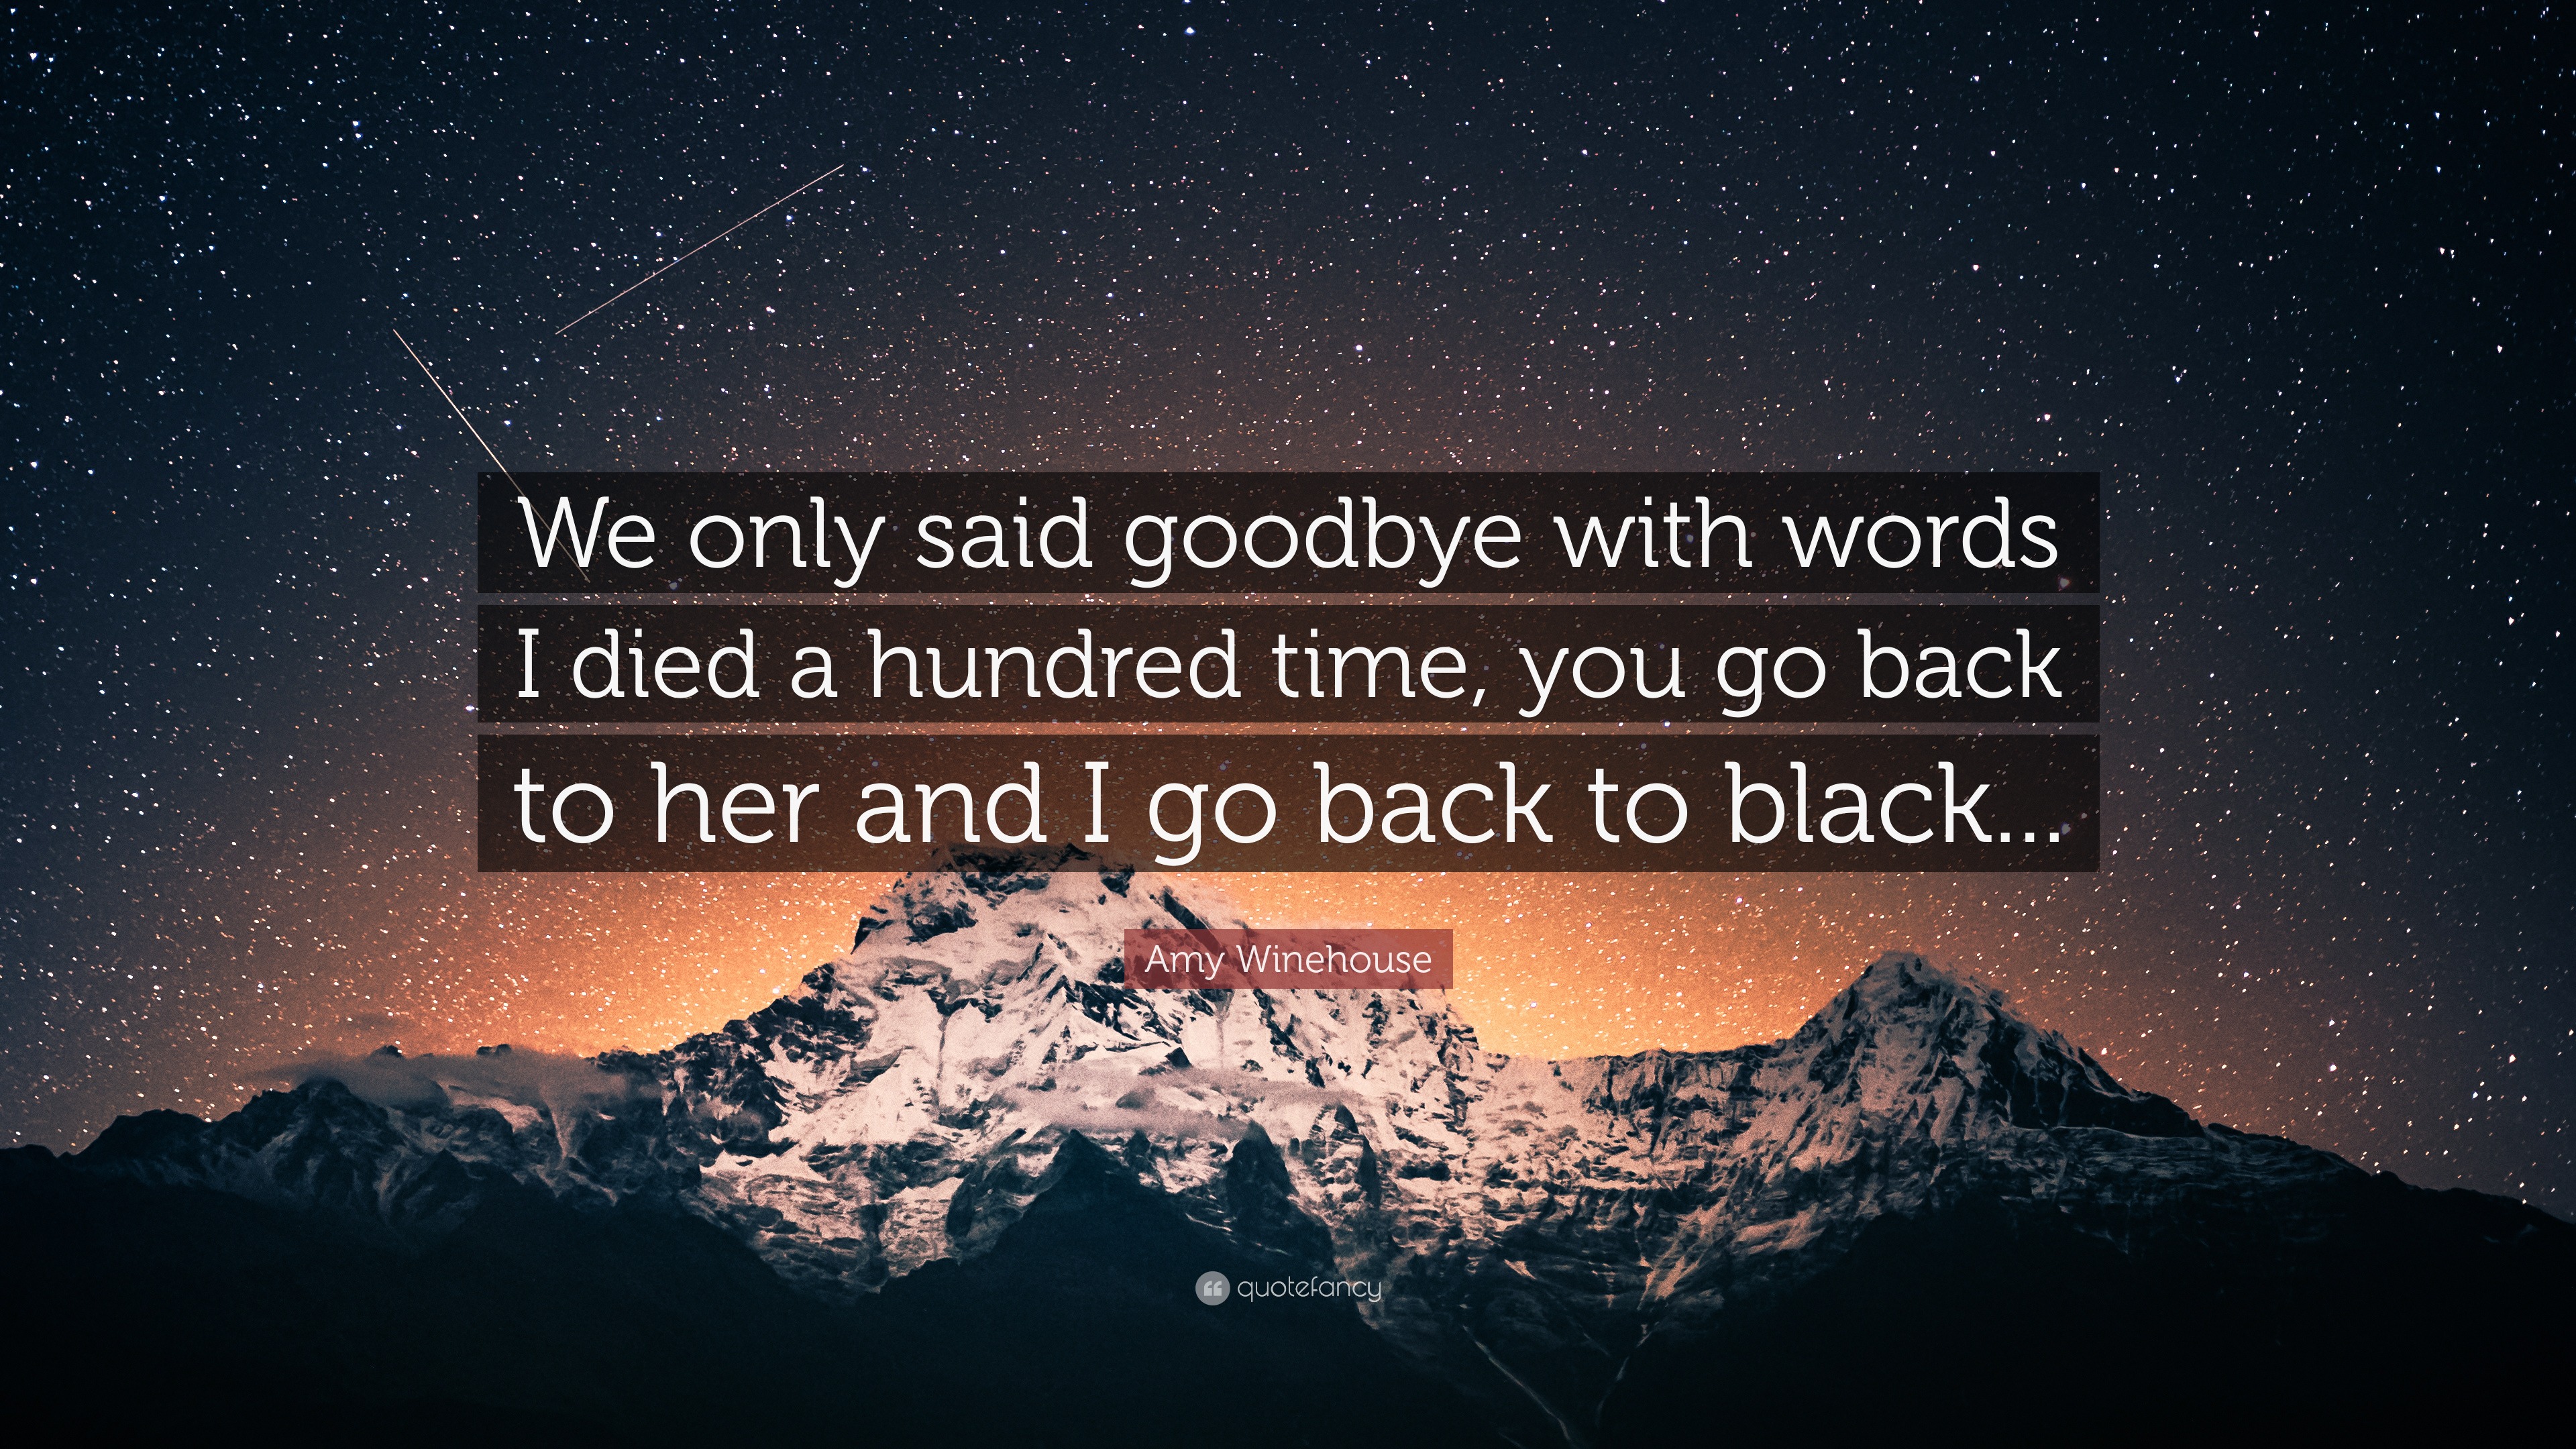 Amy Winehouse Quote We Only Said Goodbye With Words I Died A Hundred Time You Go Back To Her And I Go Back To Black 7 Wallpapers Quotefancy